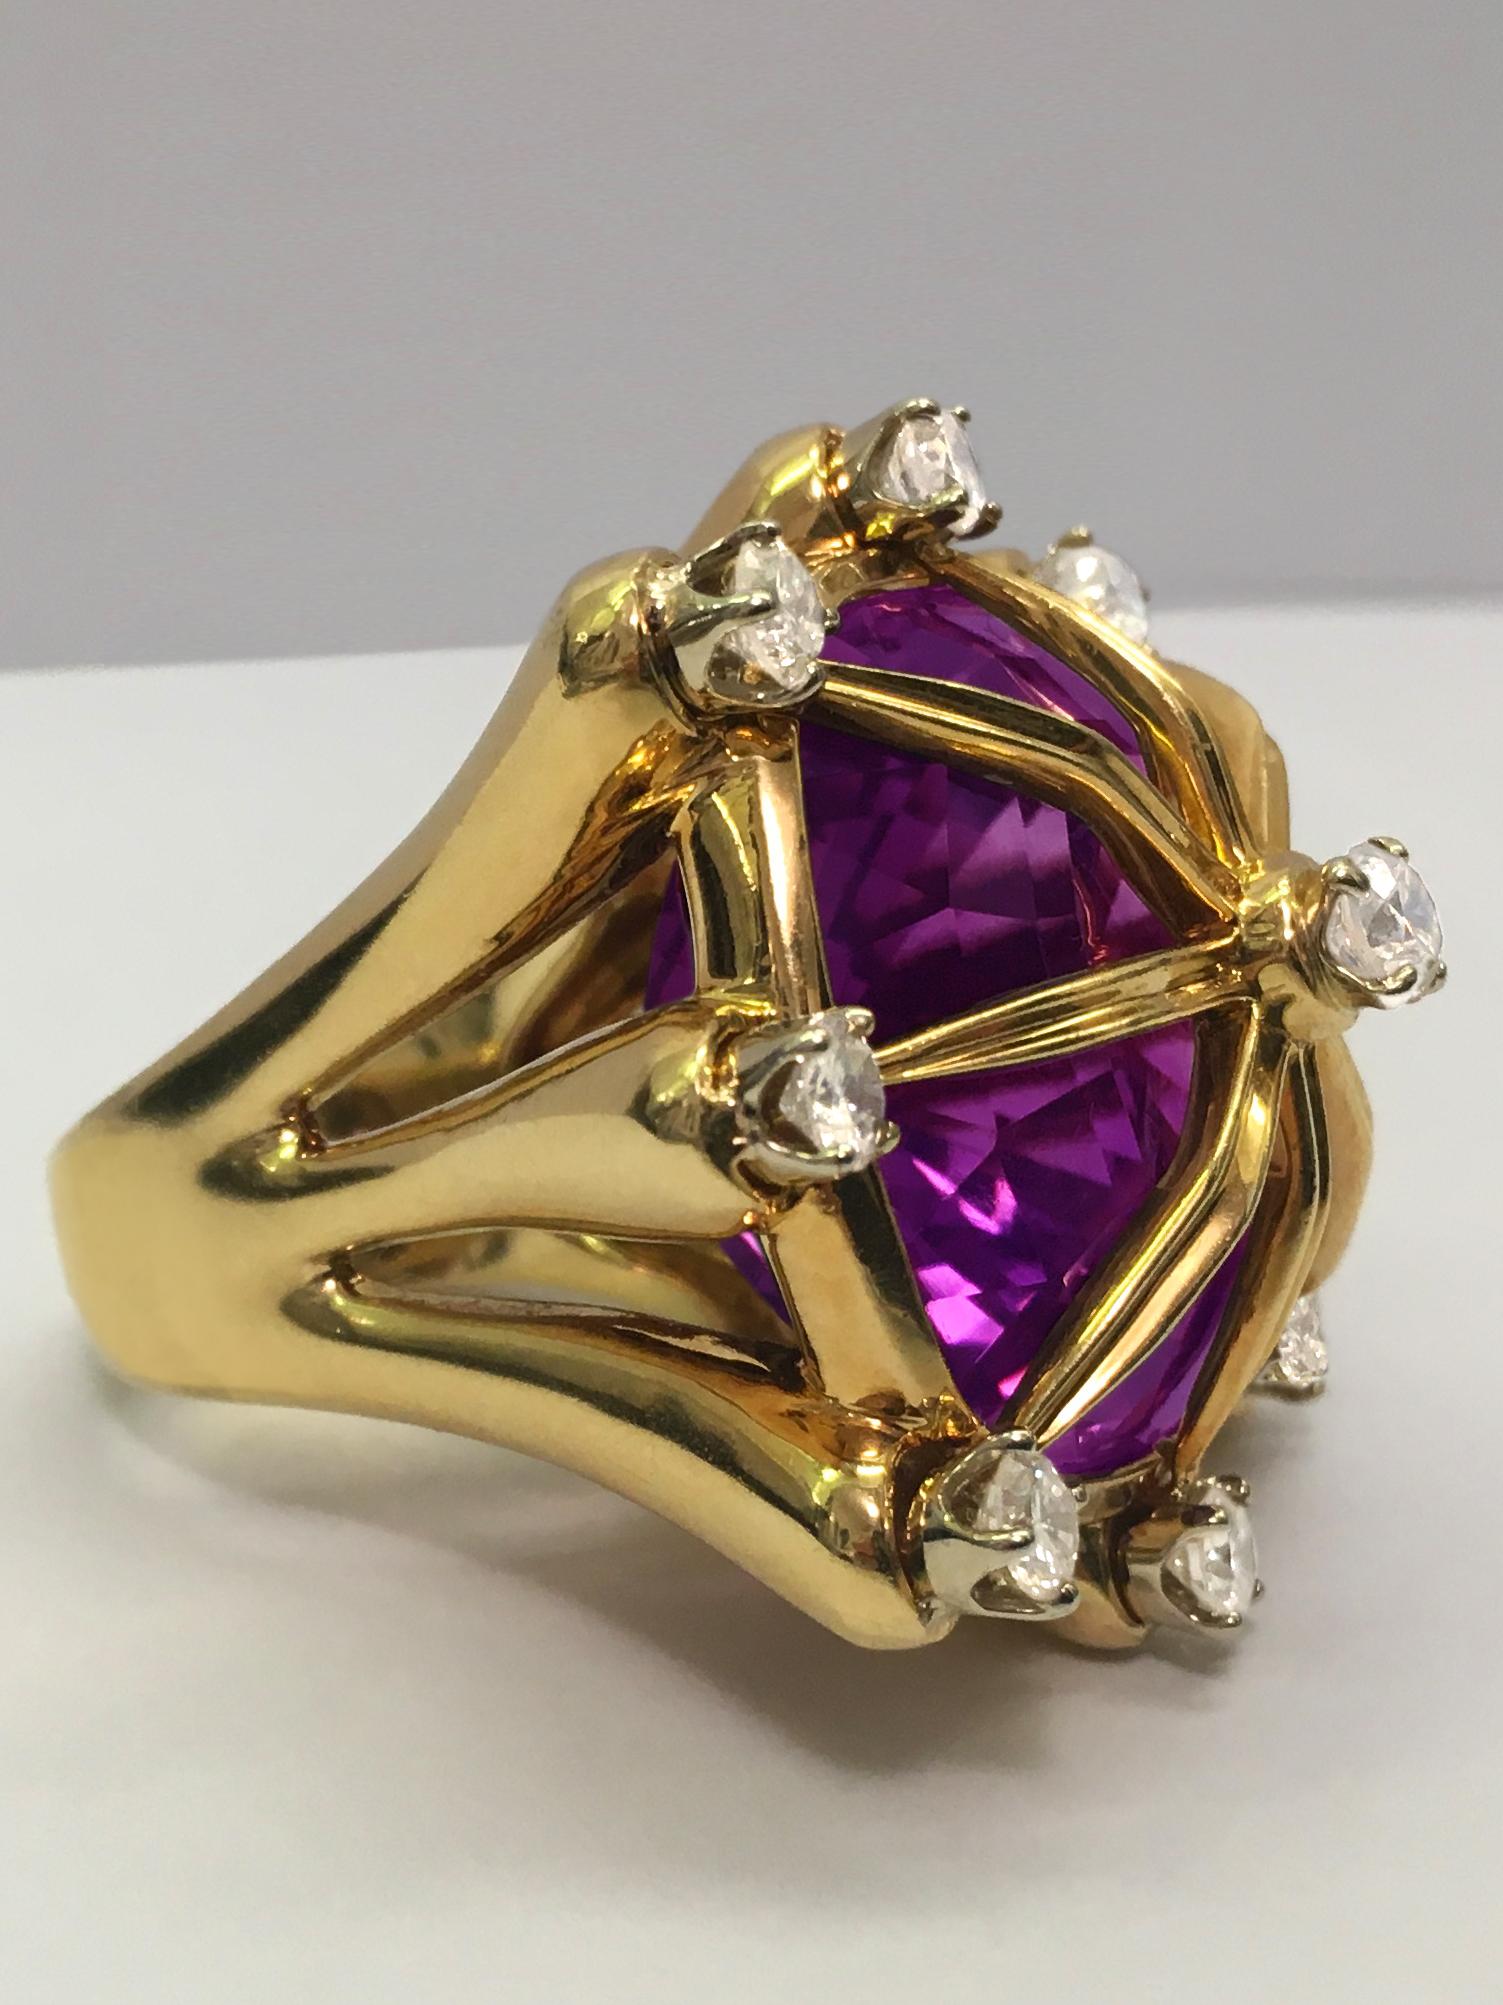 One cushion-cut amethyst approximately 100 cararts, 9 circular-cut diamonds, weighting approximately 2.25 cararts total, H/I color, VS-SI clarity, size 6 1/4 - signed Tony Duquette